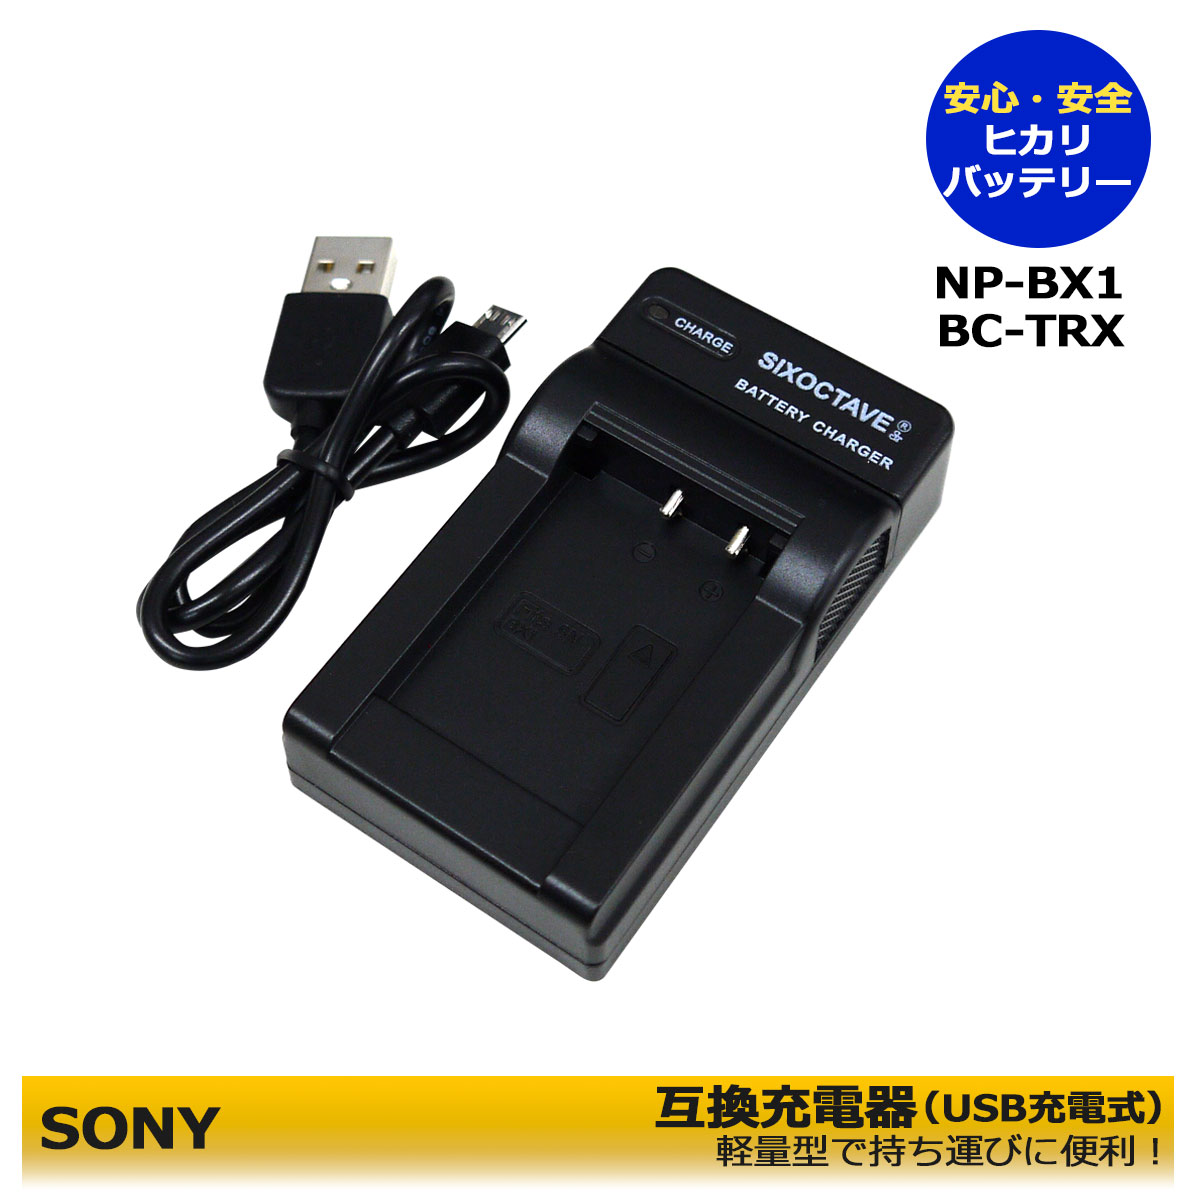 NP-BX1SONY ̵ۡߴŴUSBżˡHDR-AS15 / HDR-AS30V / HDR-AS30VR / ...